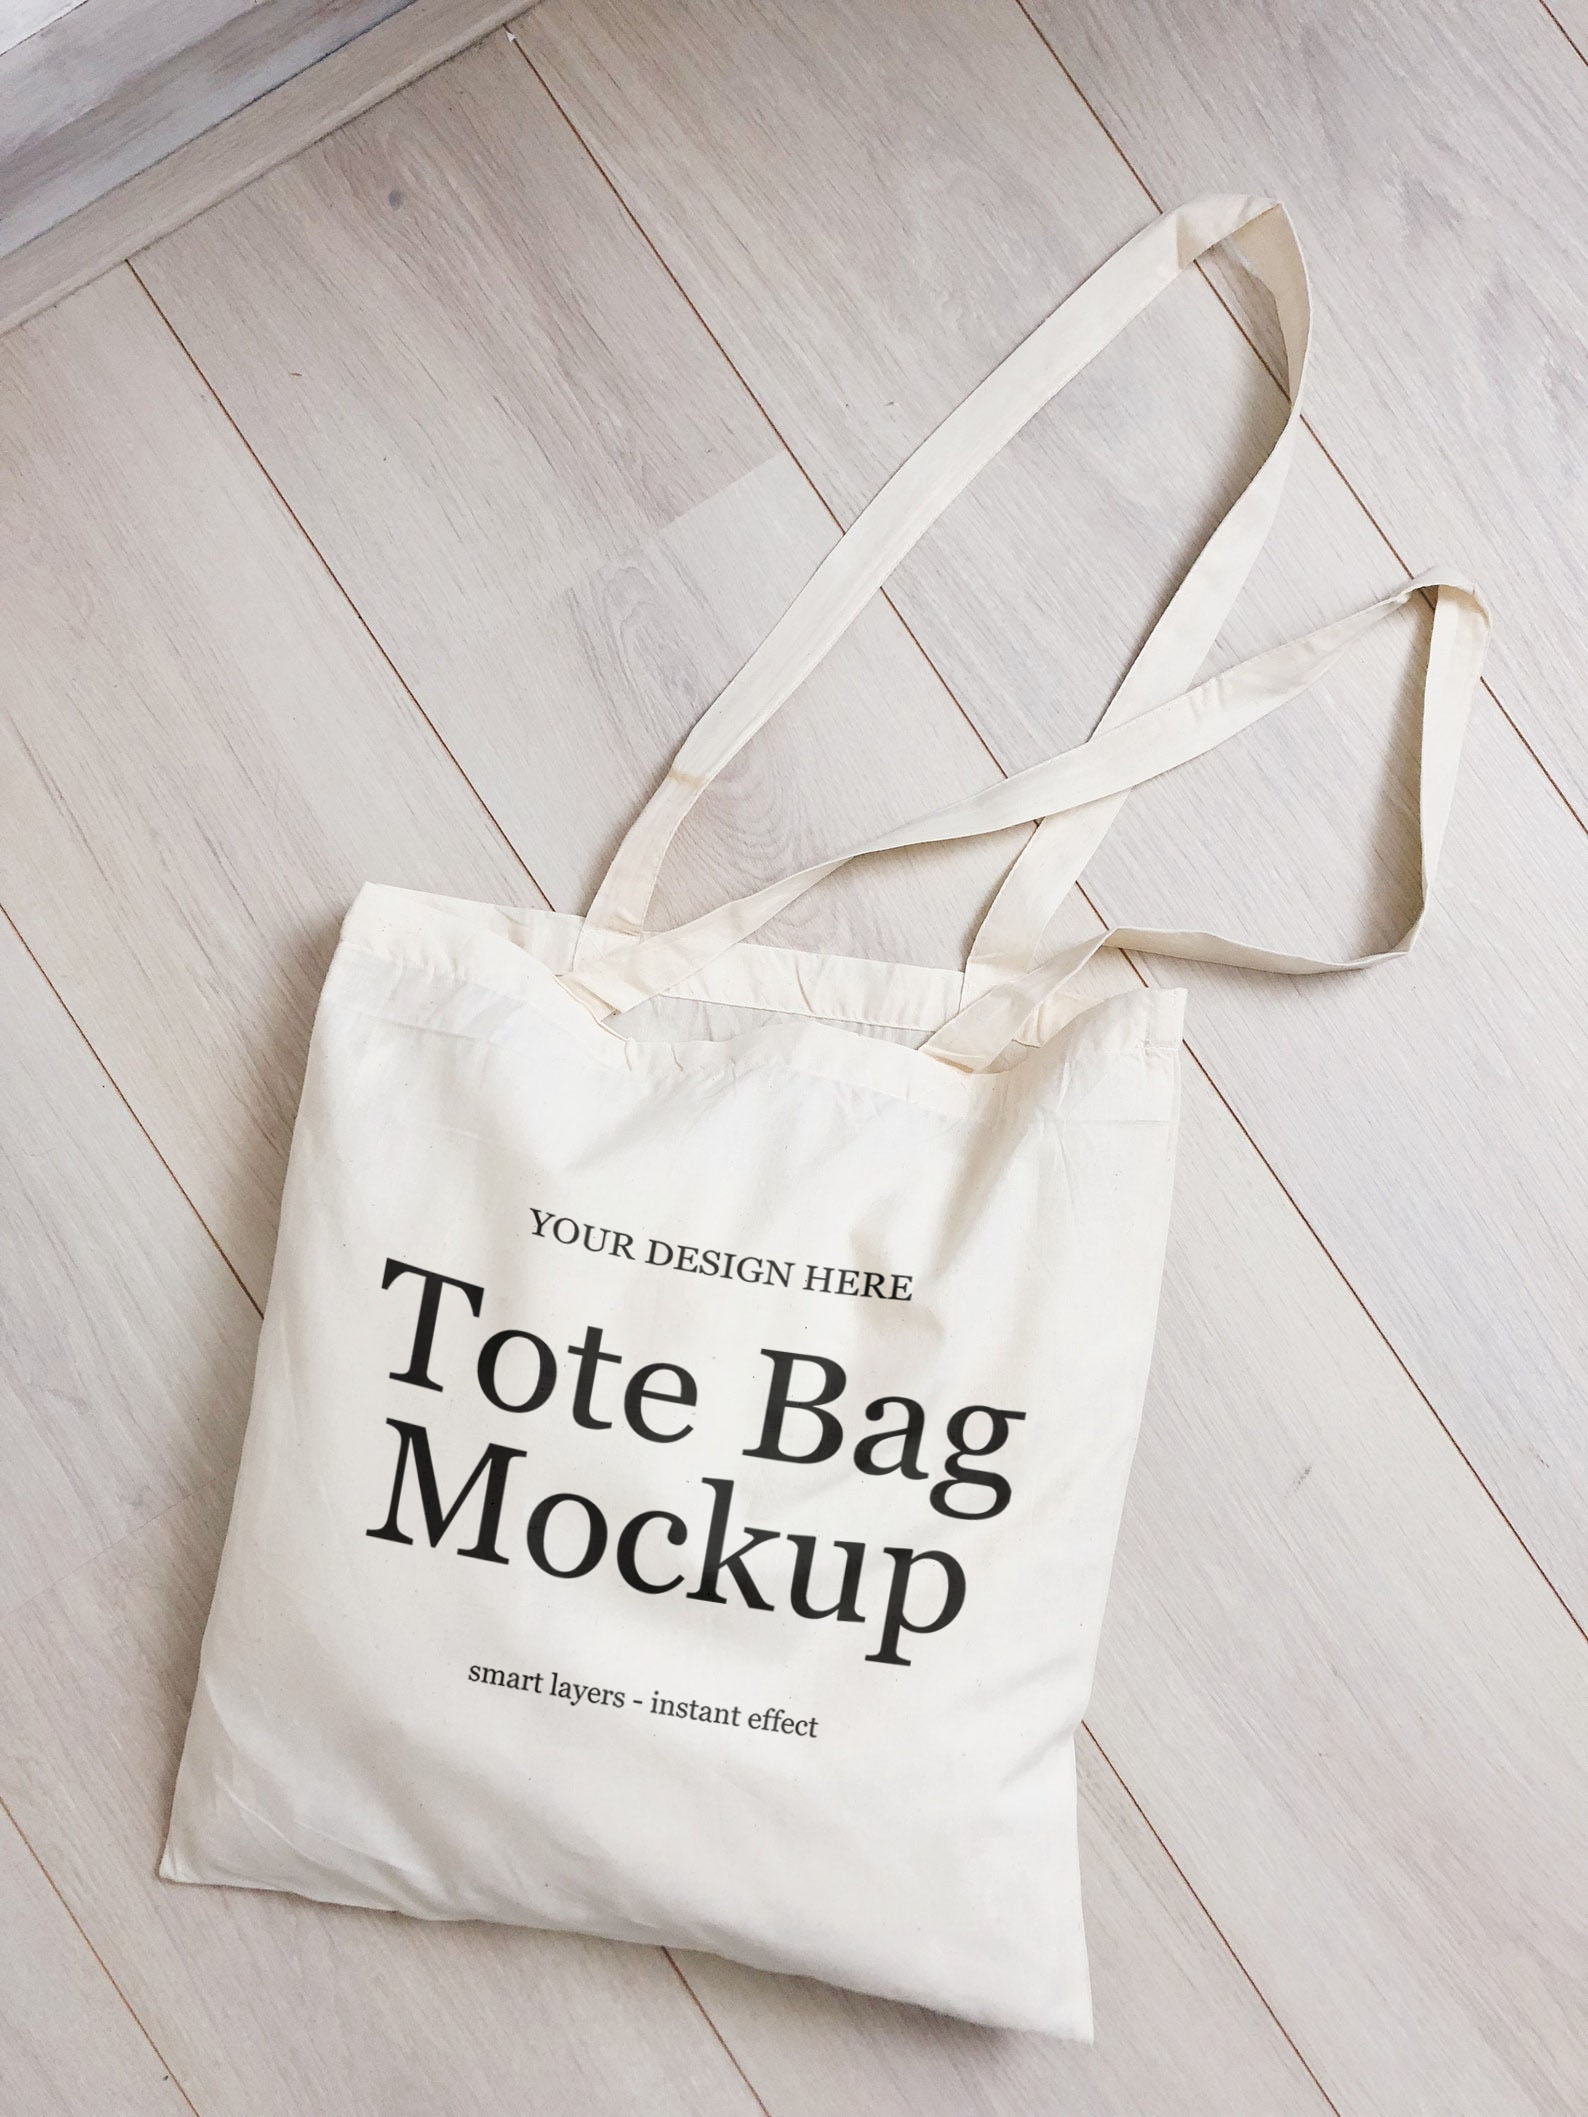 Free PSD White Canvas Tote Bag Mockup Download 51 by diosvolt on DeviantArt